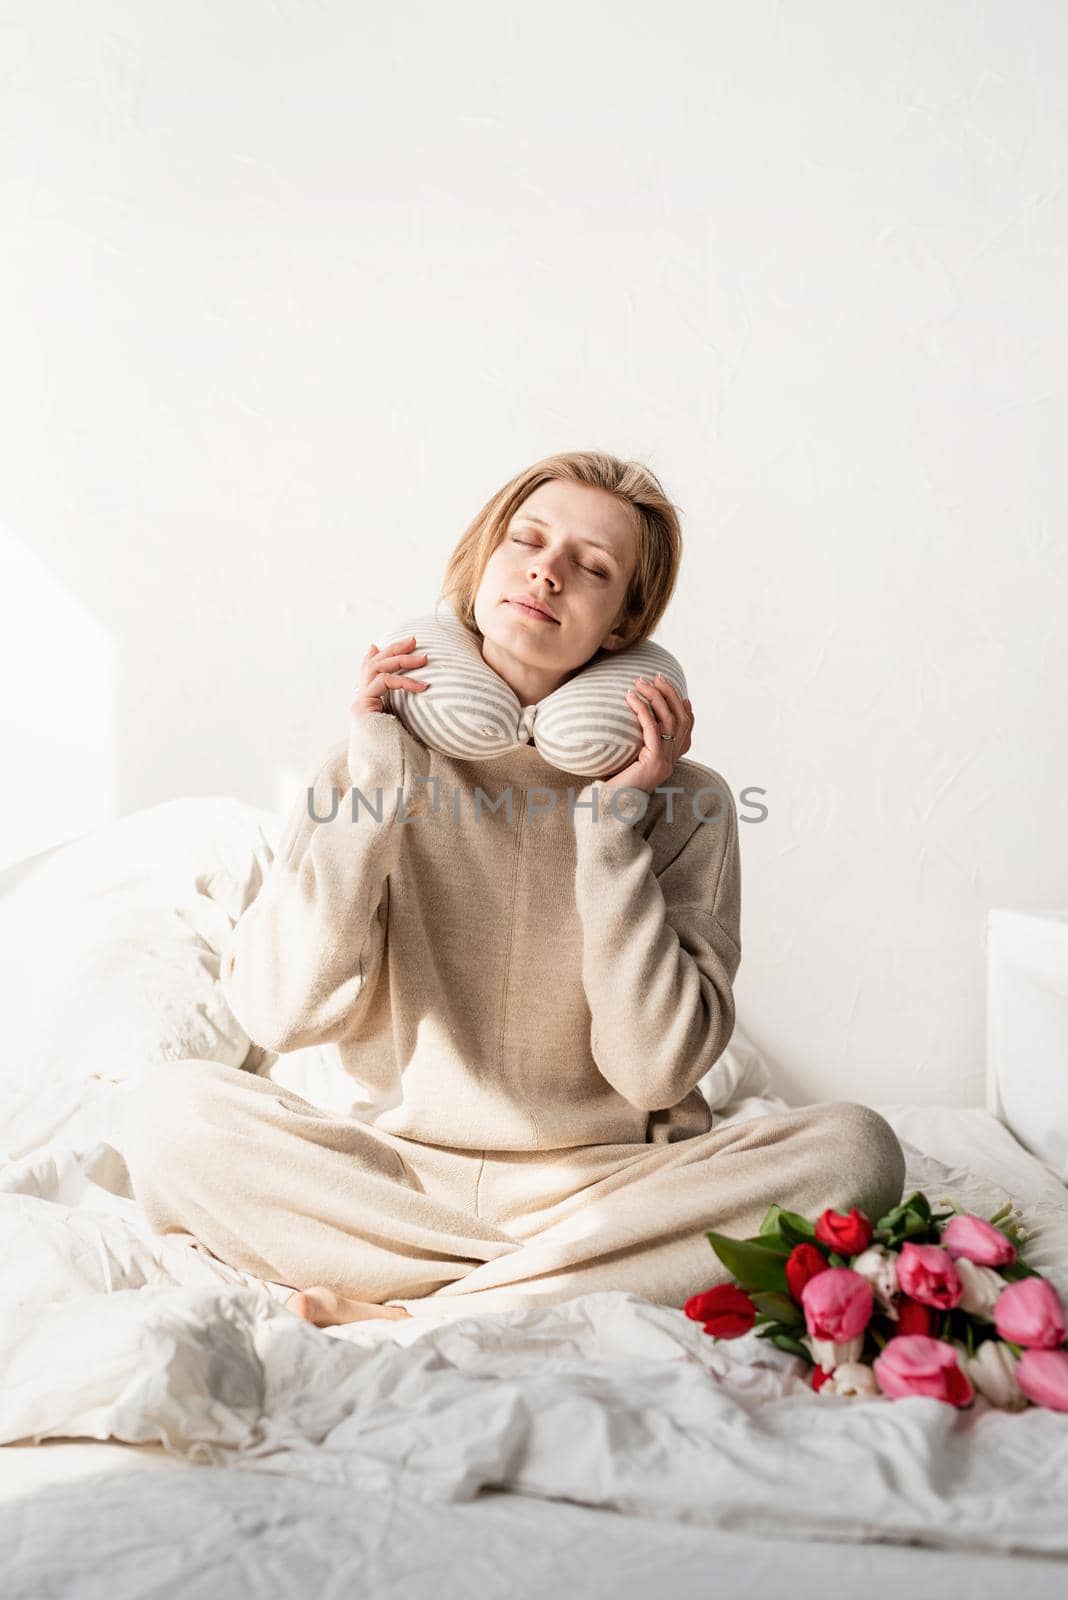 Sleepy woman sitting in bed wearing pajamas and pillow over the neck, tulip flowers on the bed